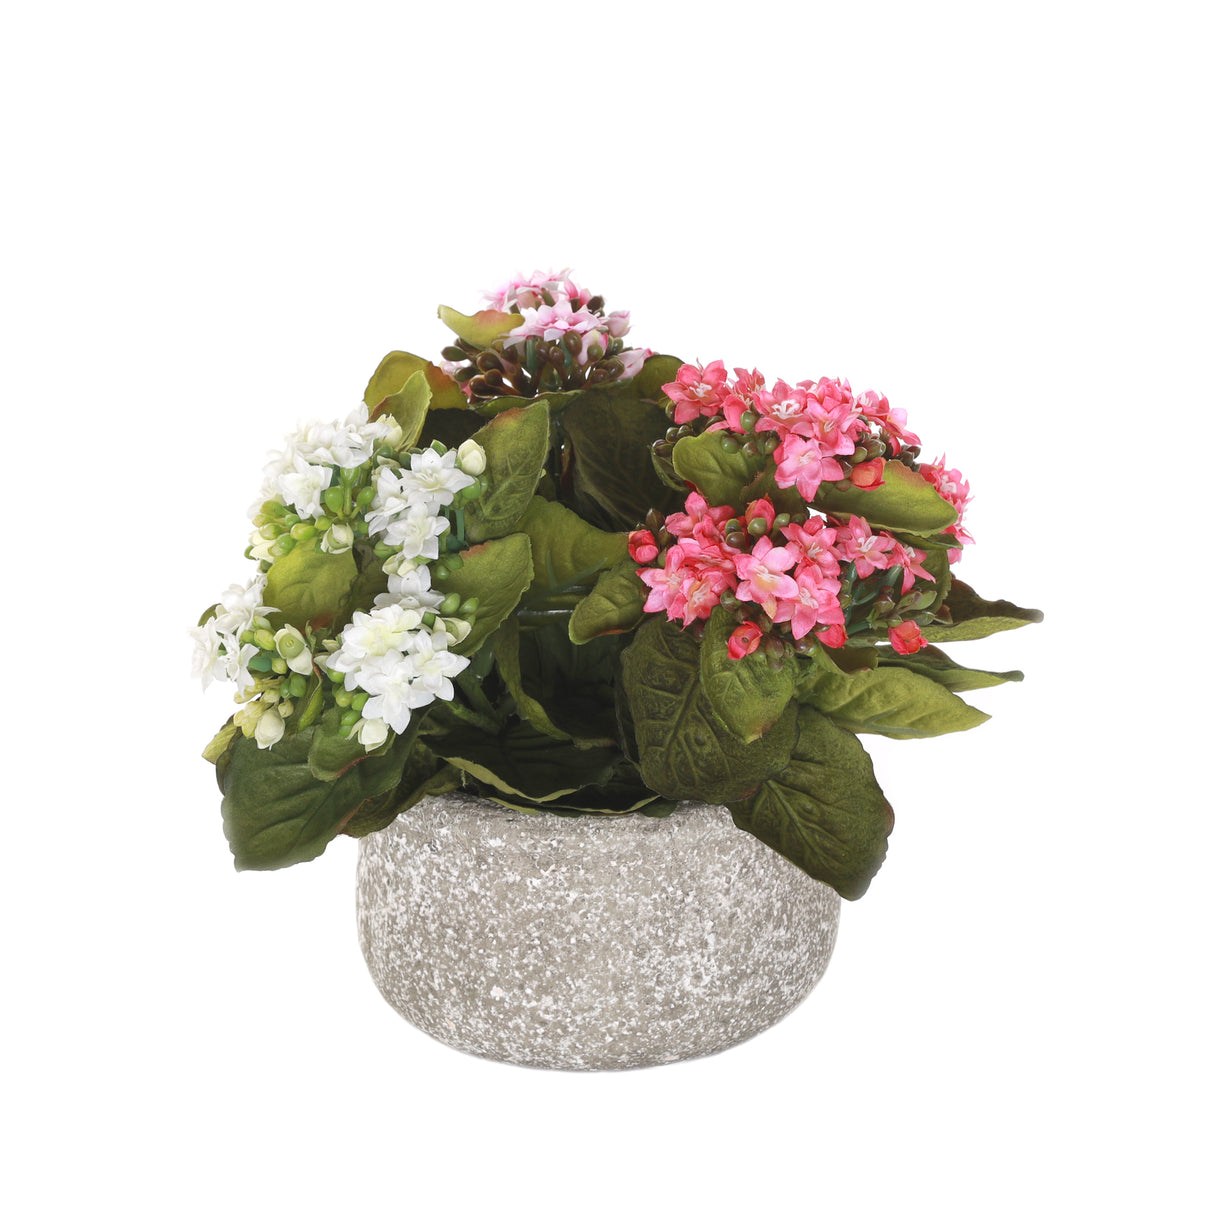 Kalanchoe Flower Bushes Pink, Rose, White in Stone Round Pot #F-213